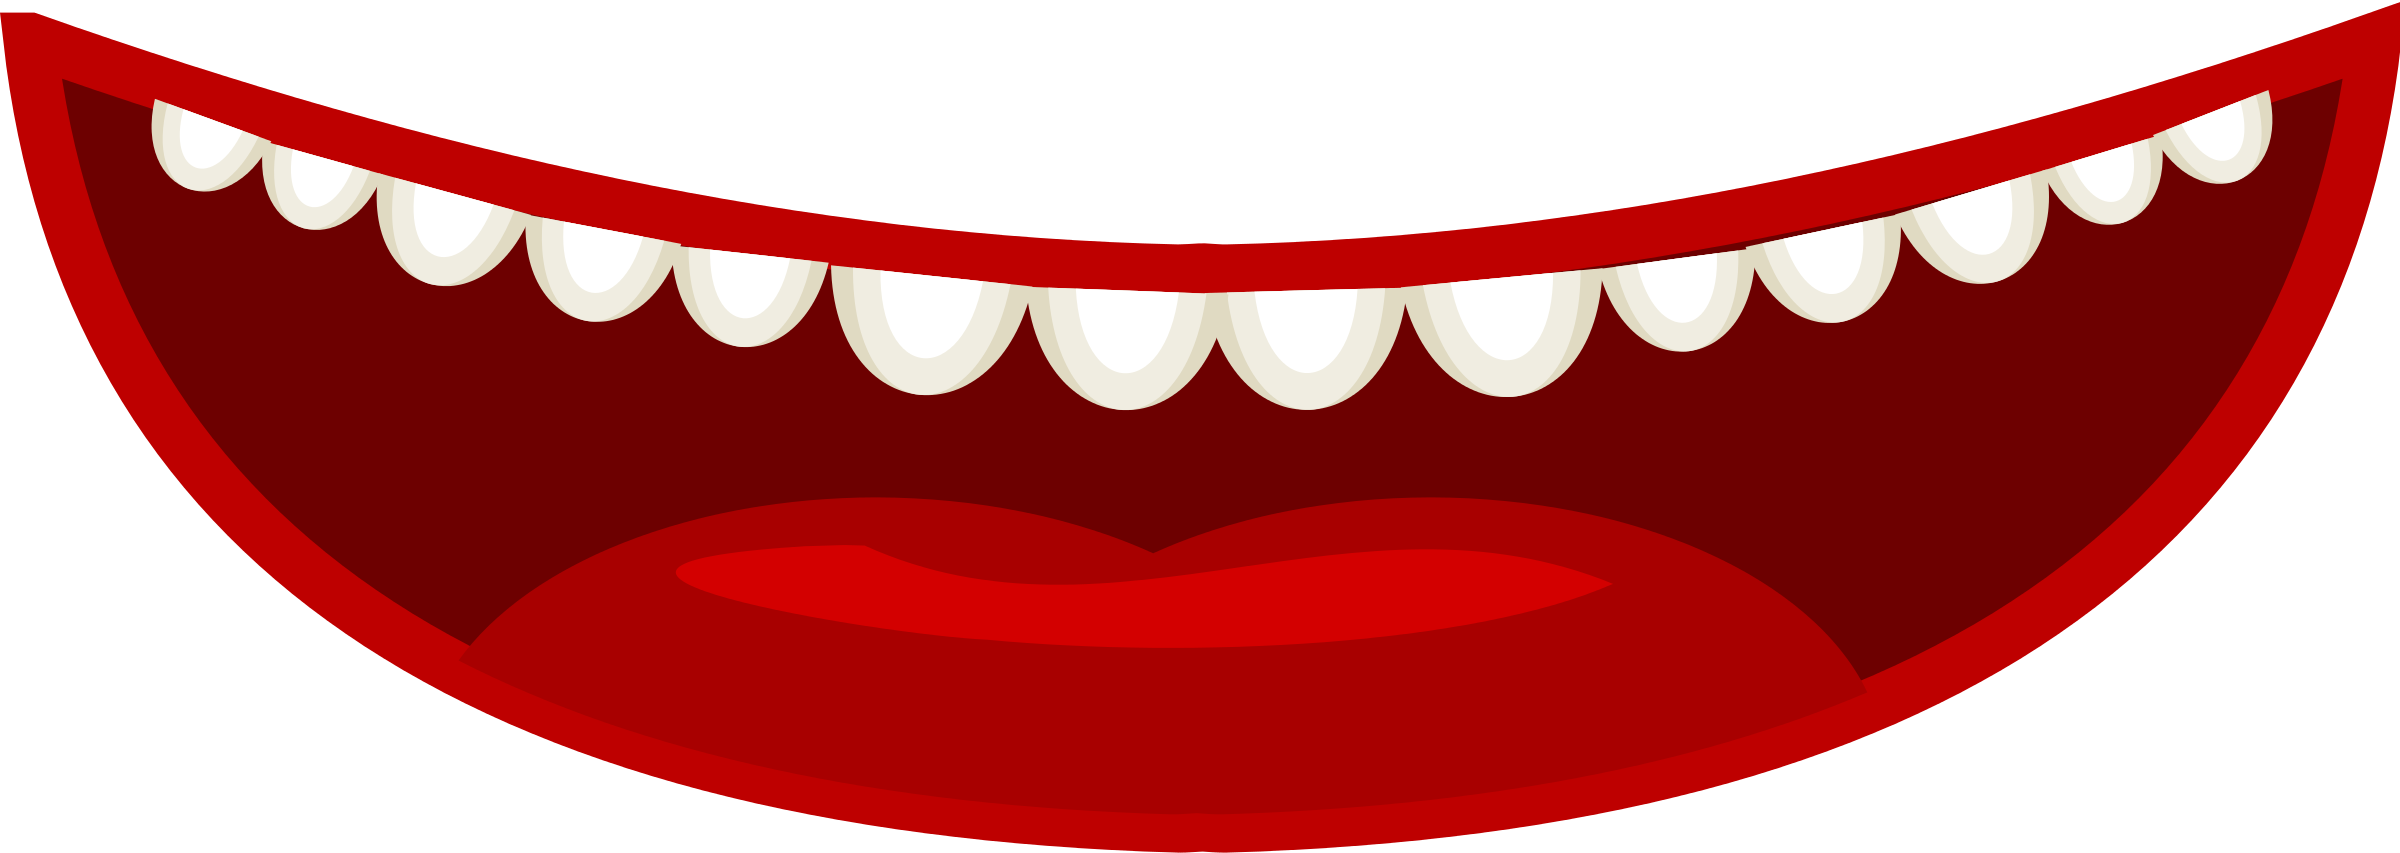 Cartoon Smile Mouth Clipart